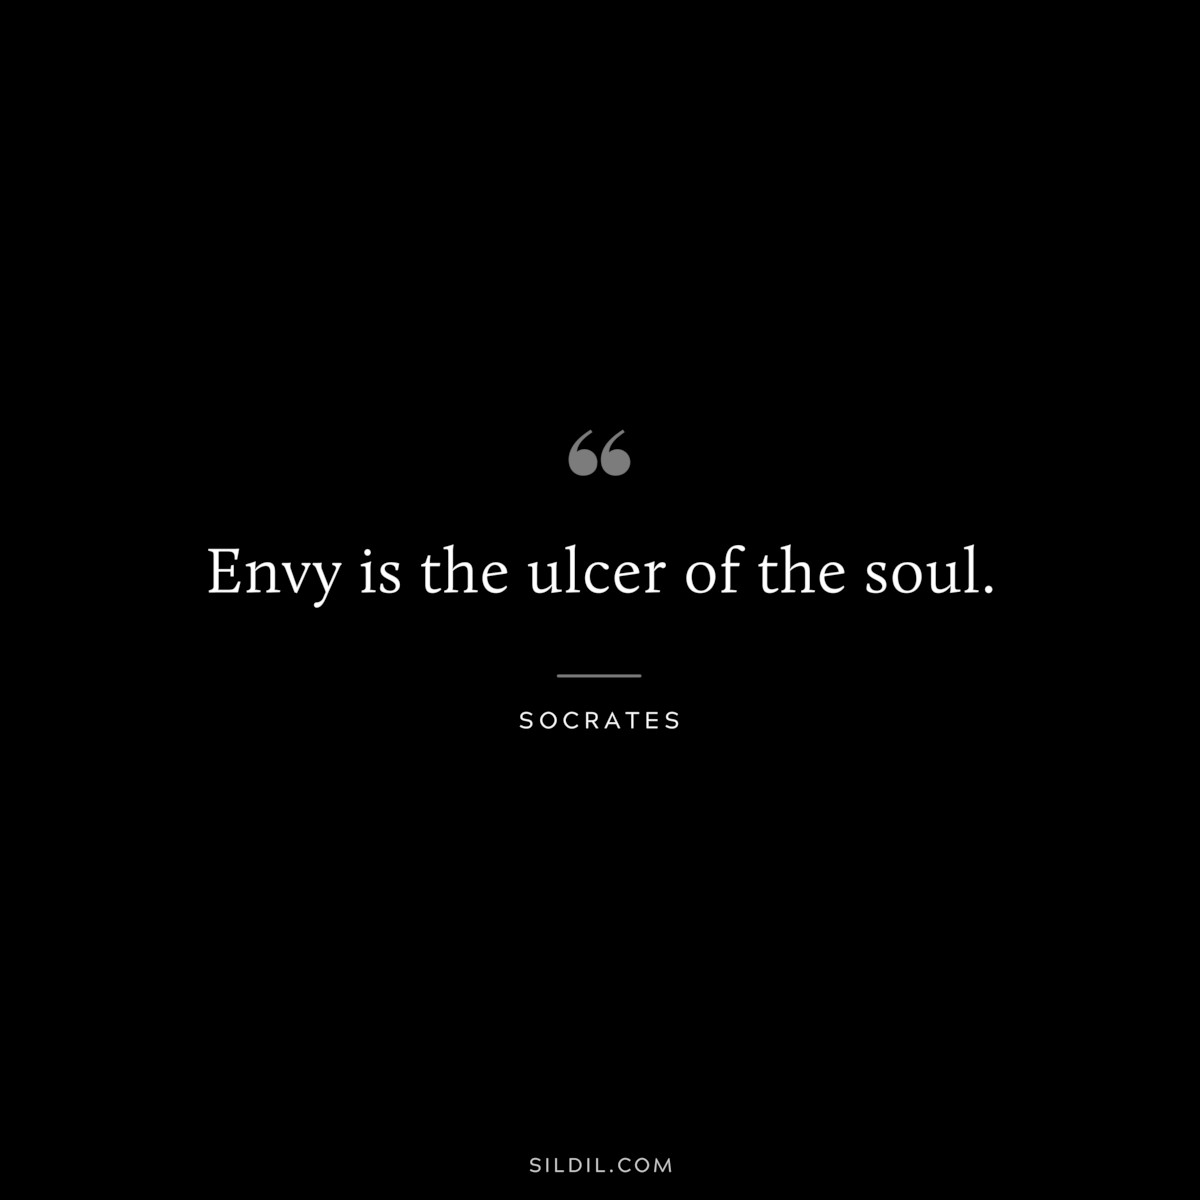 Envy is the ulcer of the soul. ― Socrates